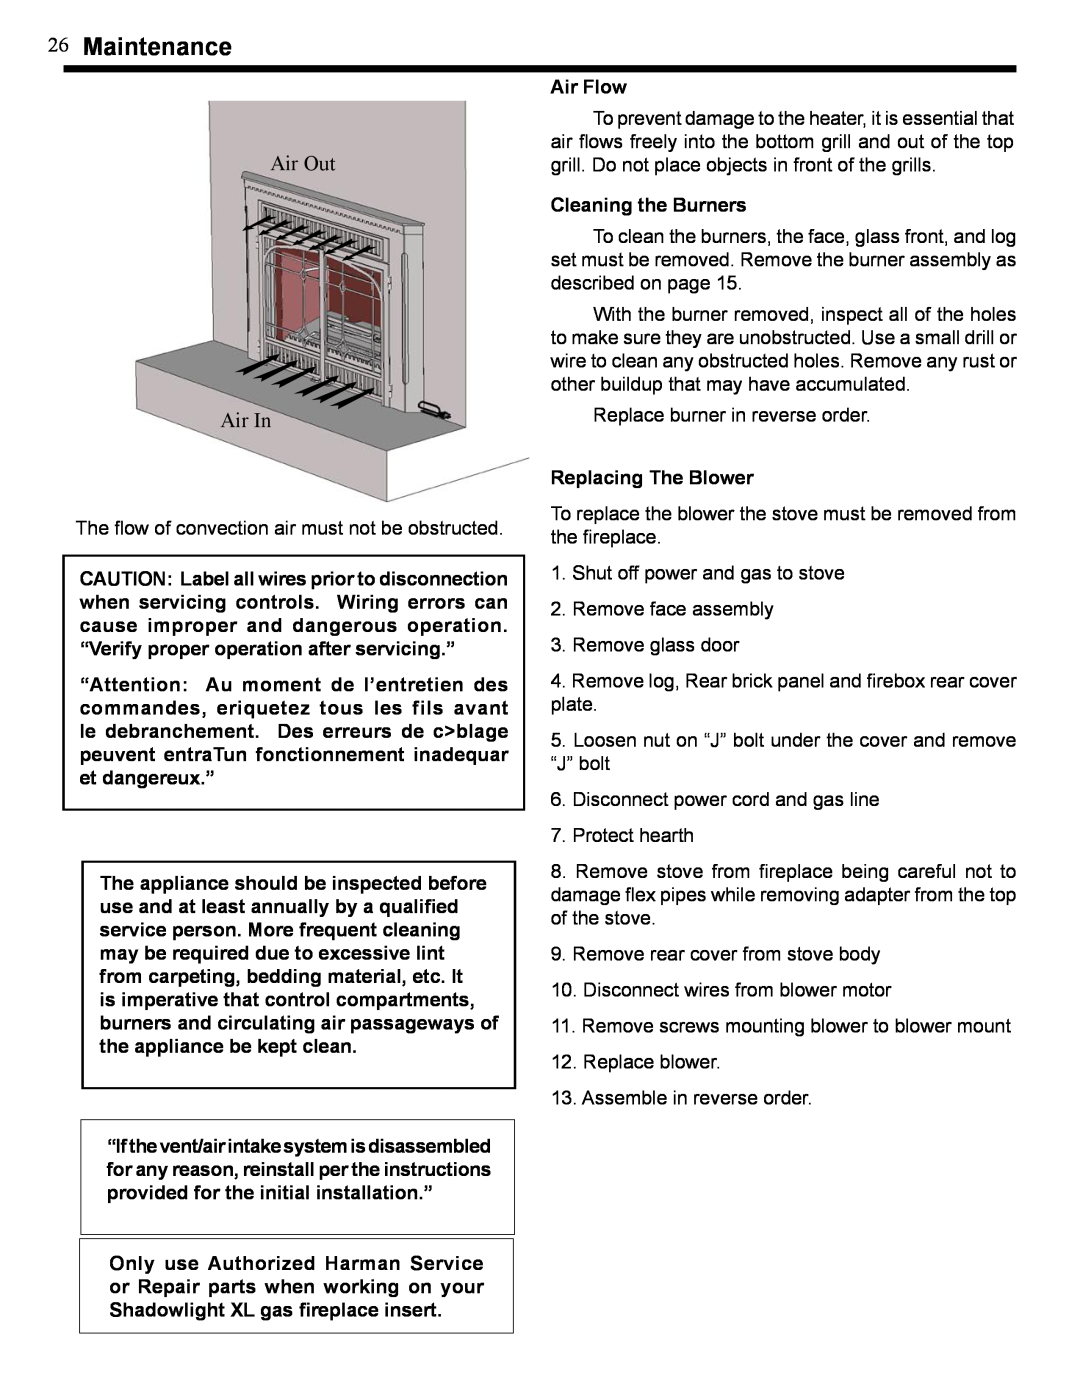 Harman Stove Company XL owner manual 26Maintenance, Air Out Air In, Air Flow, Cleaning the Burners, Replacing The Blower 